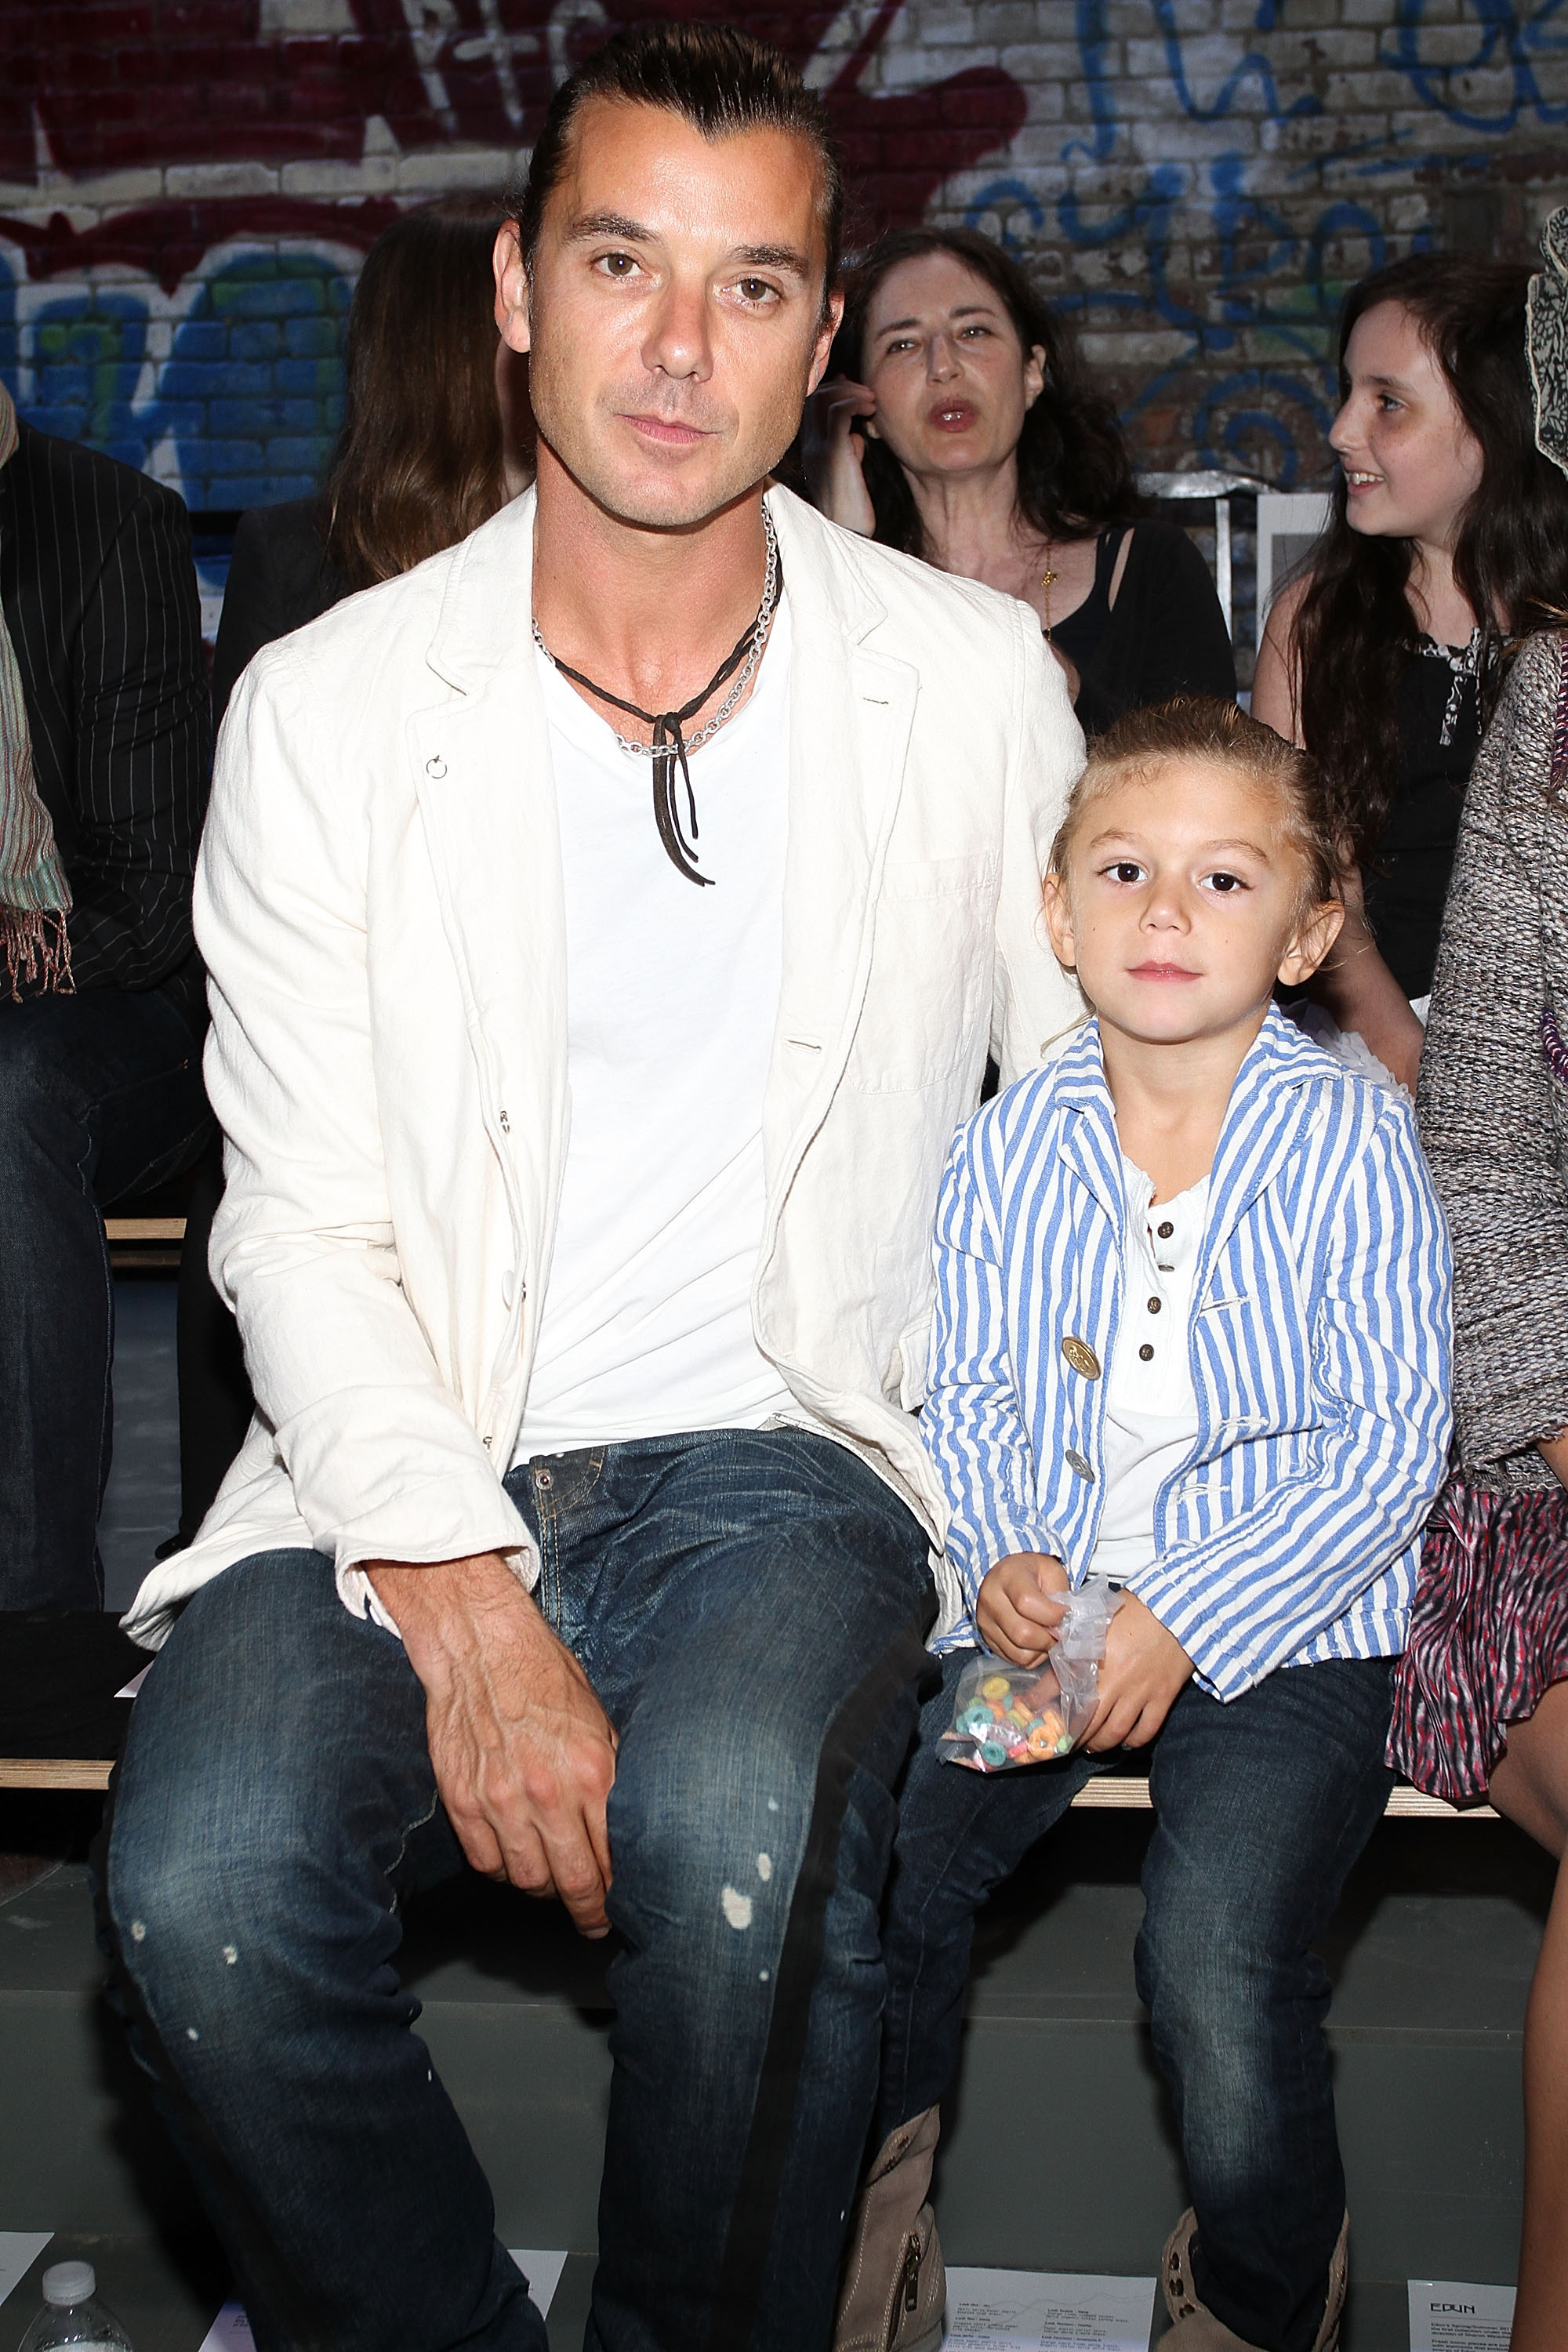 Gavin and Kingston Rossdale at the Edun Spring 2011 fashion show in New York City on September 11, 2010 | Source: Getty Images